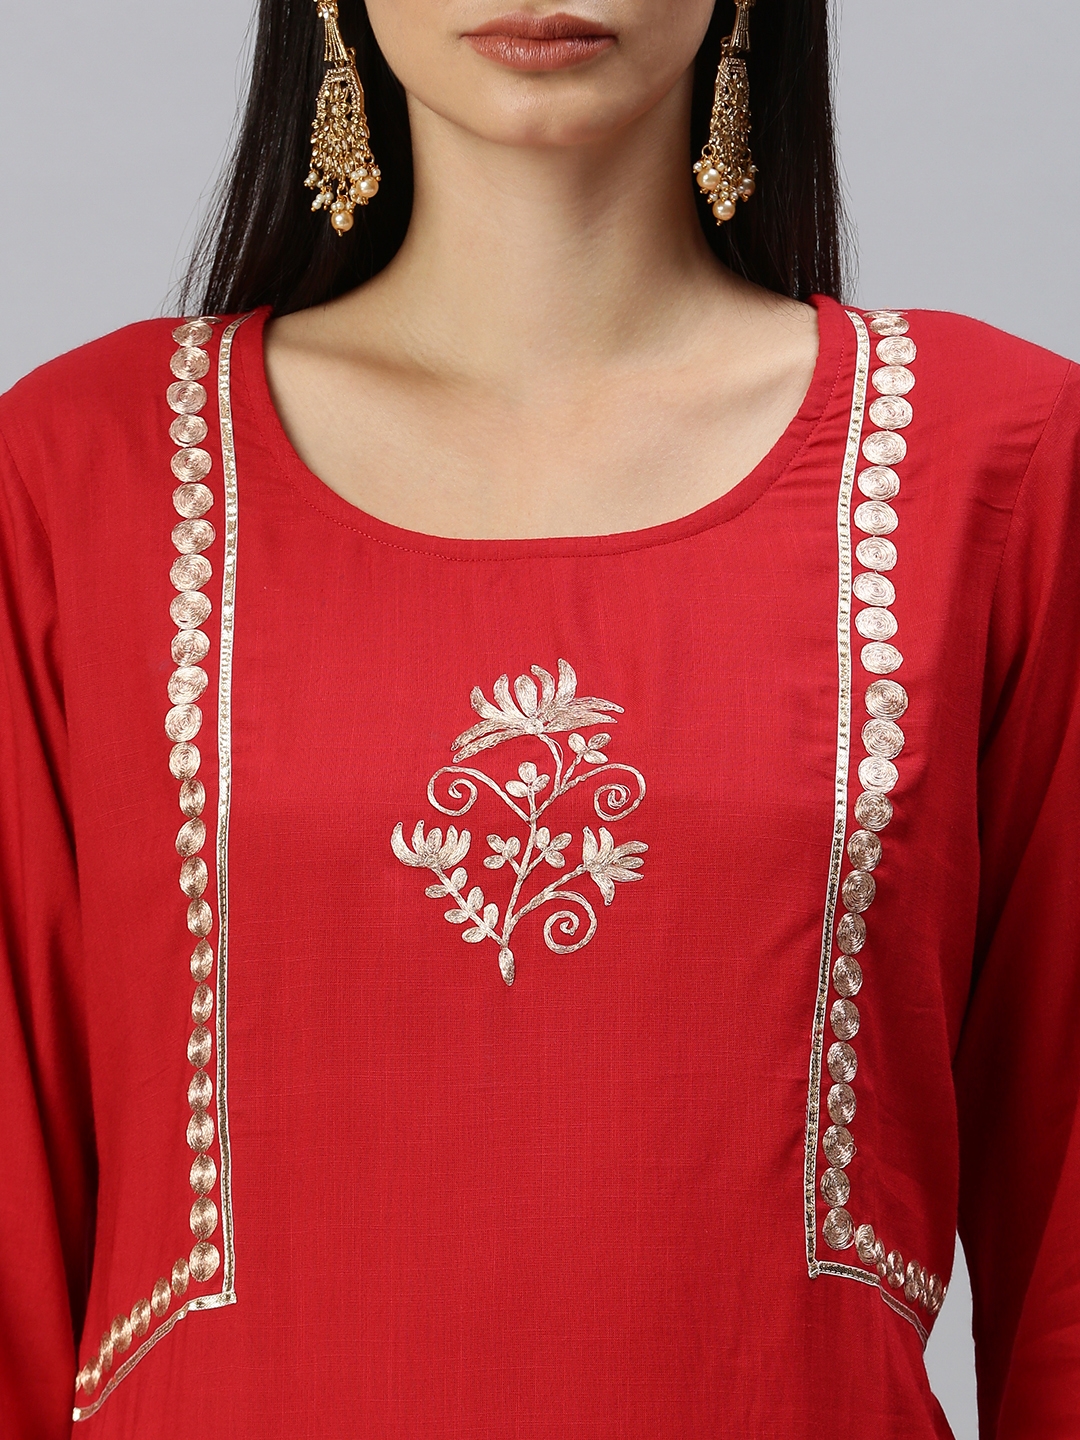 Showoff Women's Red Solid Kurta and Trouser